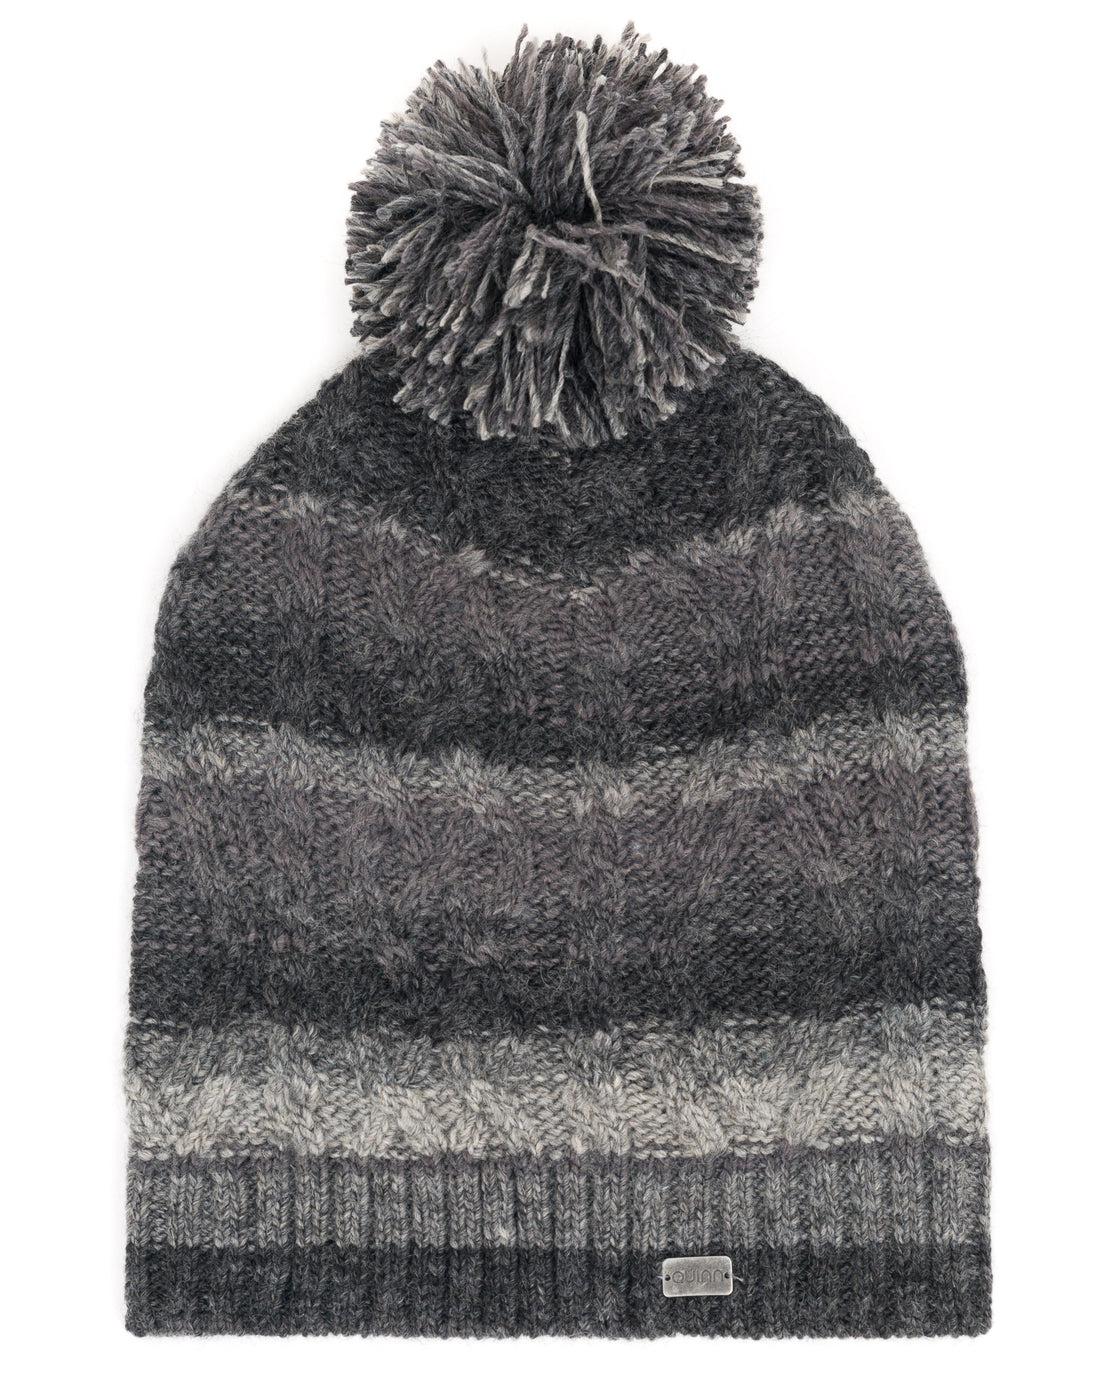 ACCESSORIES - Ombre Pom Pom Hat